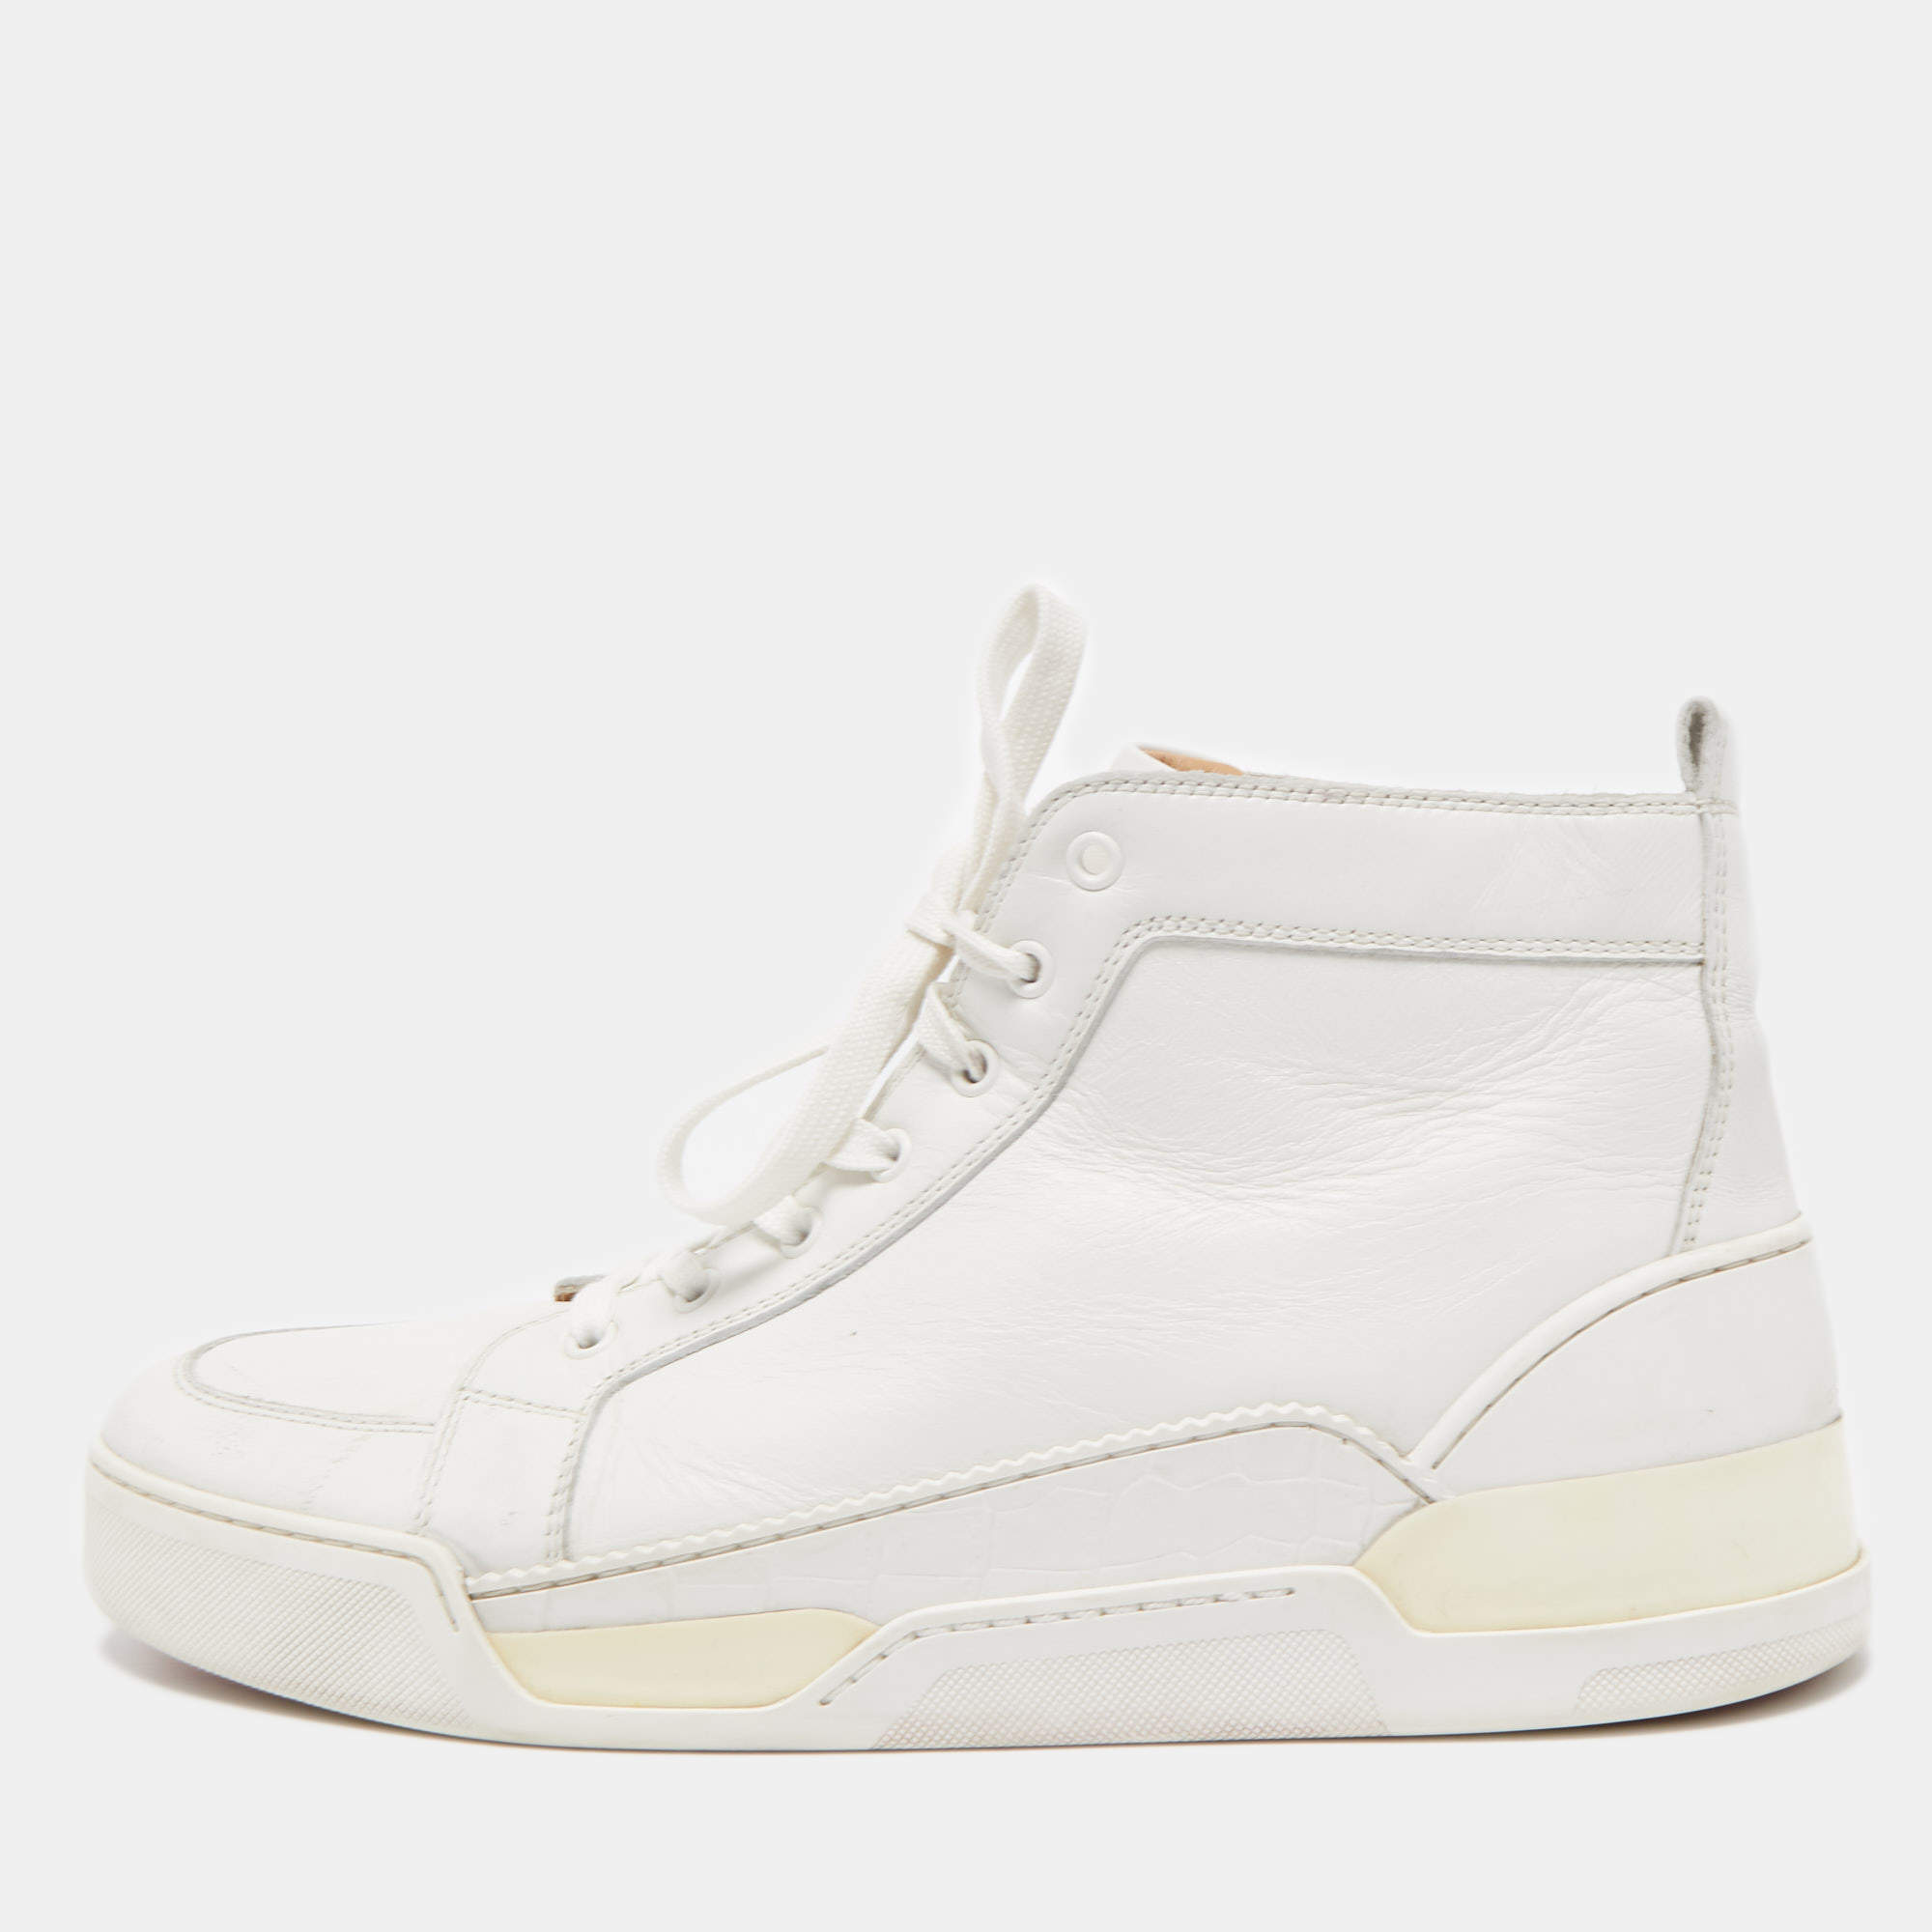 Christian Louboutin White Leather High Top Sneakers Size 45.5